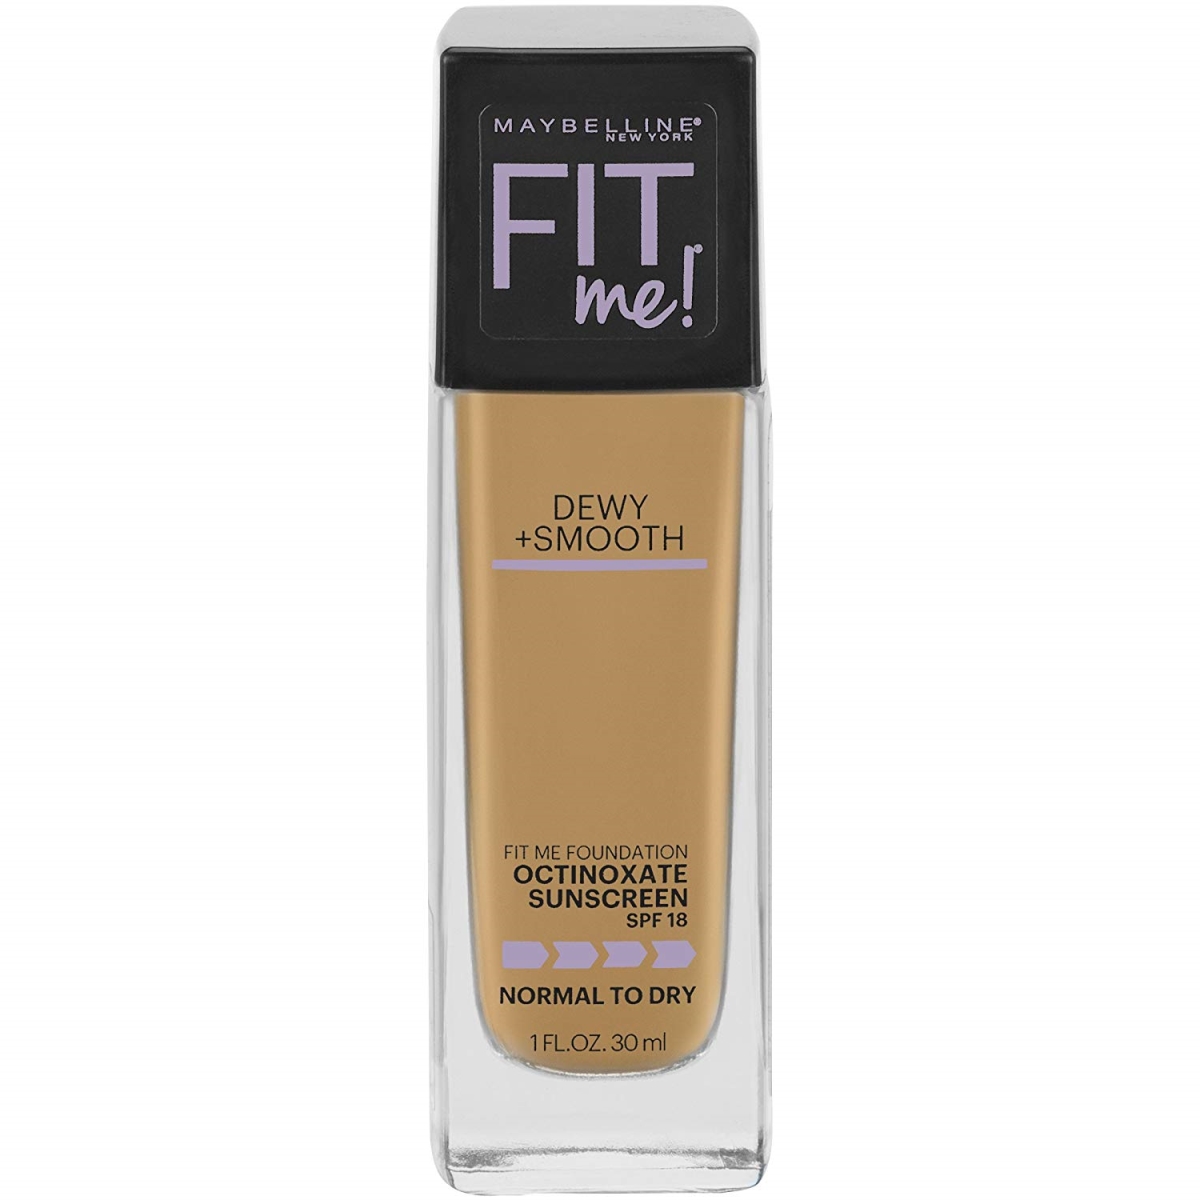 7712391 Fit Me Dewy Plus Smooth Foundation, 228 Soft Tan - Pack Of 2